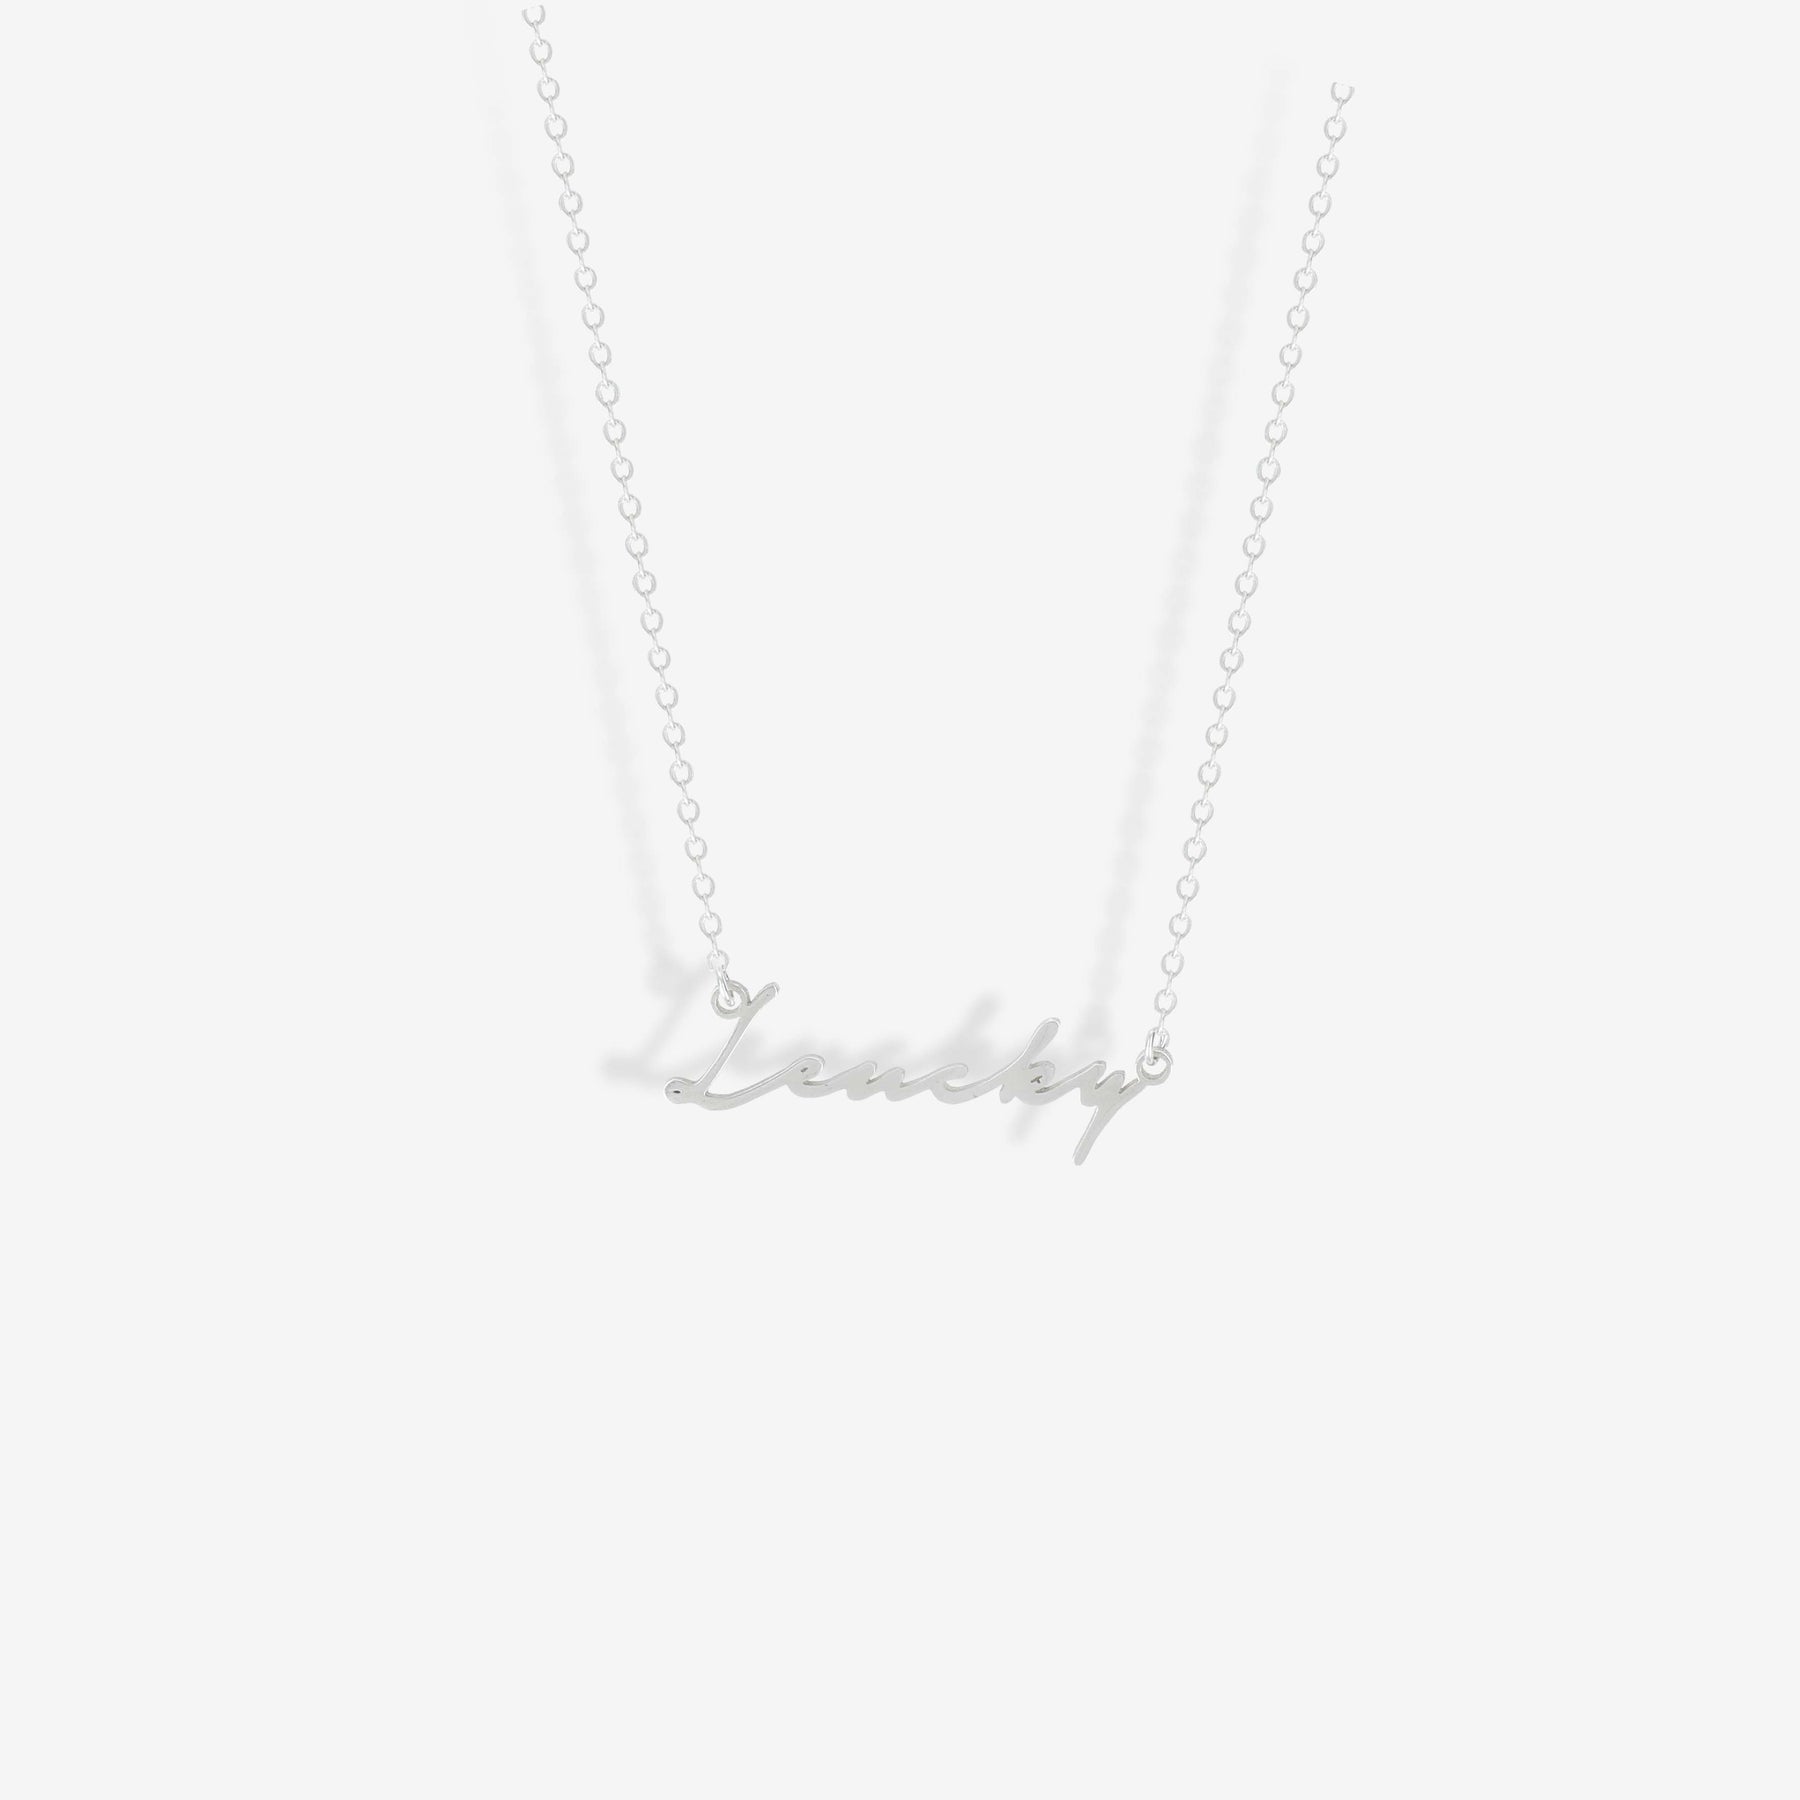 Custom Name Necklace Necklace Custom Paw Jewelry Sterling Silver 14''/35.5cm 